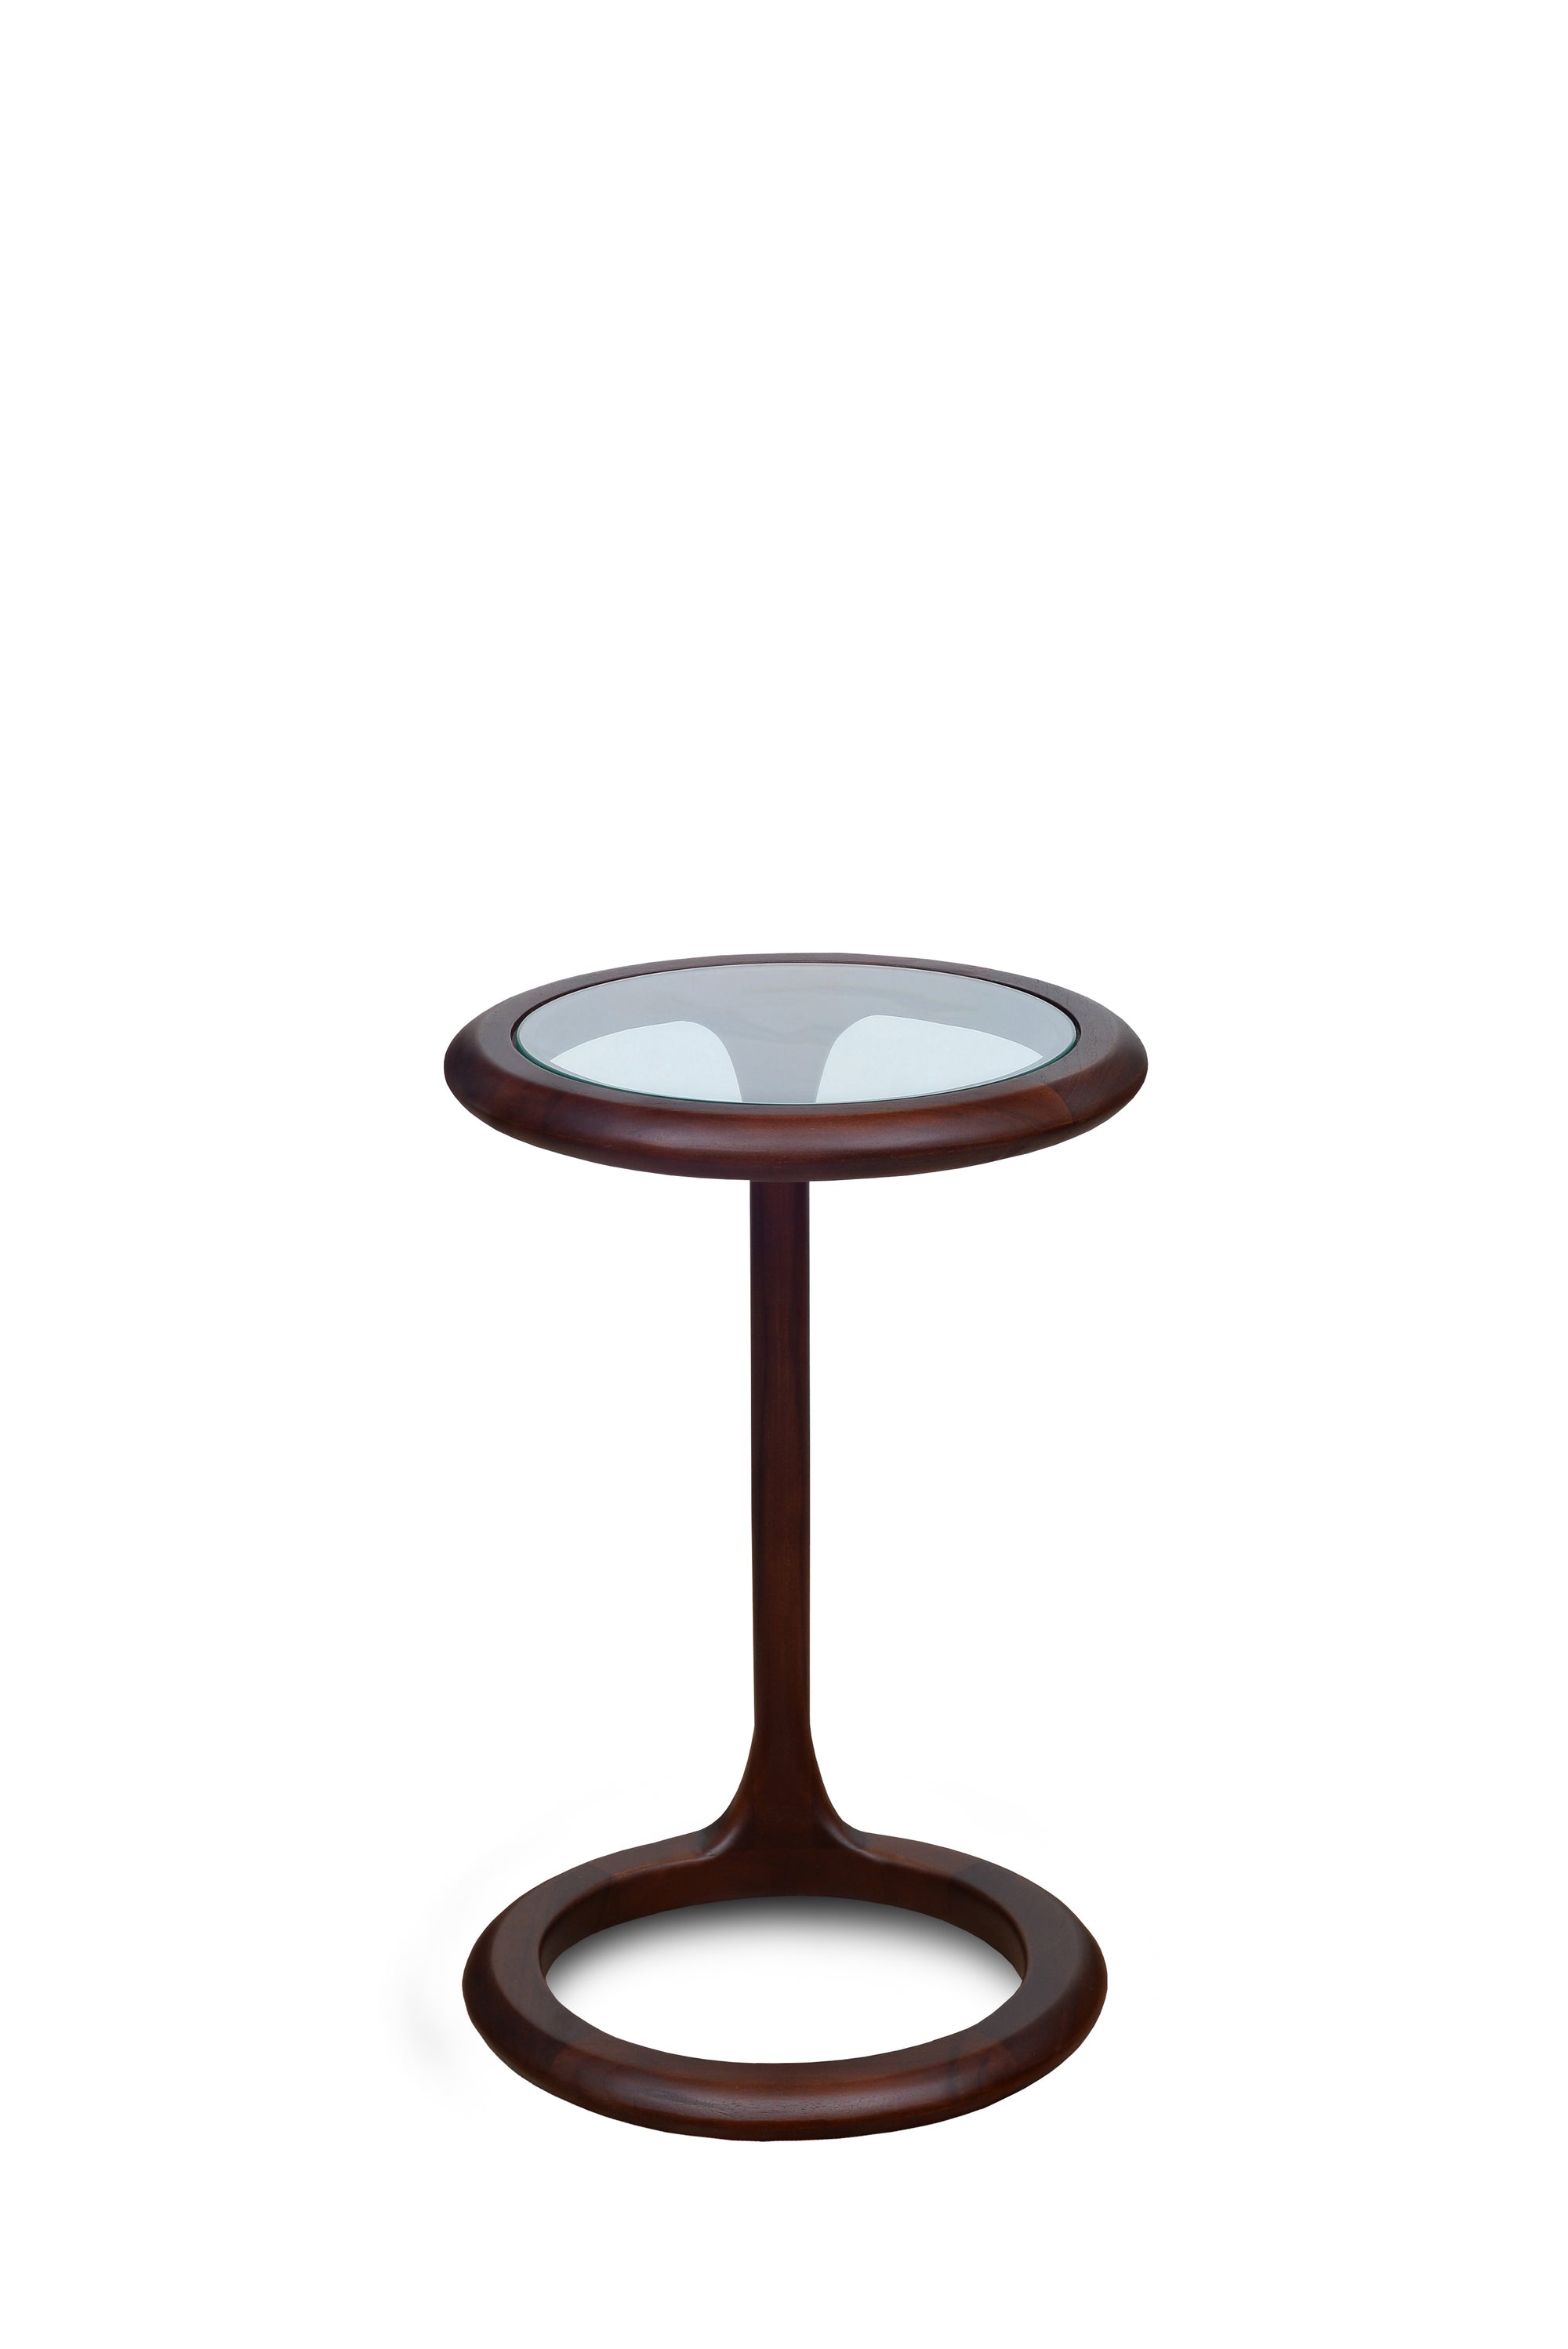 Nido High Table Teak with Glass Top in Walnut Finish